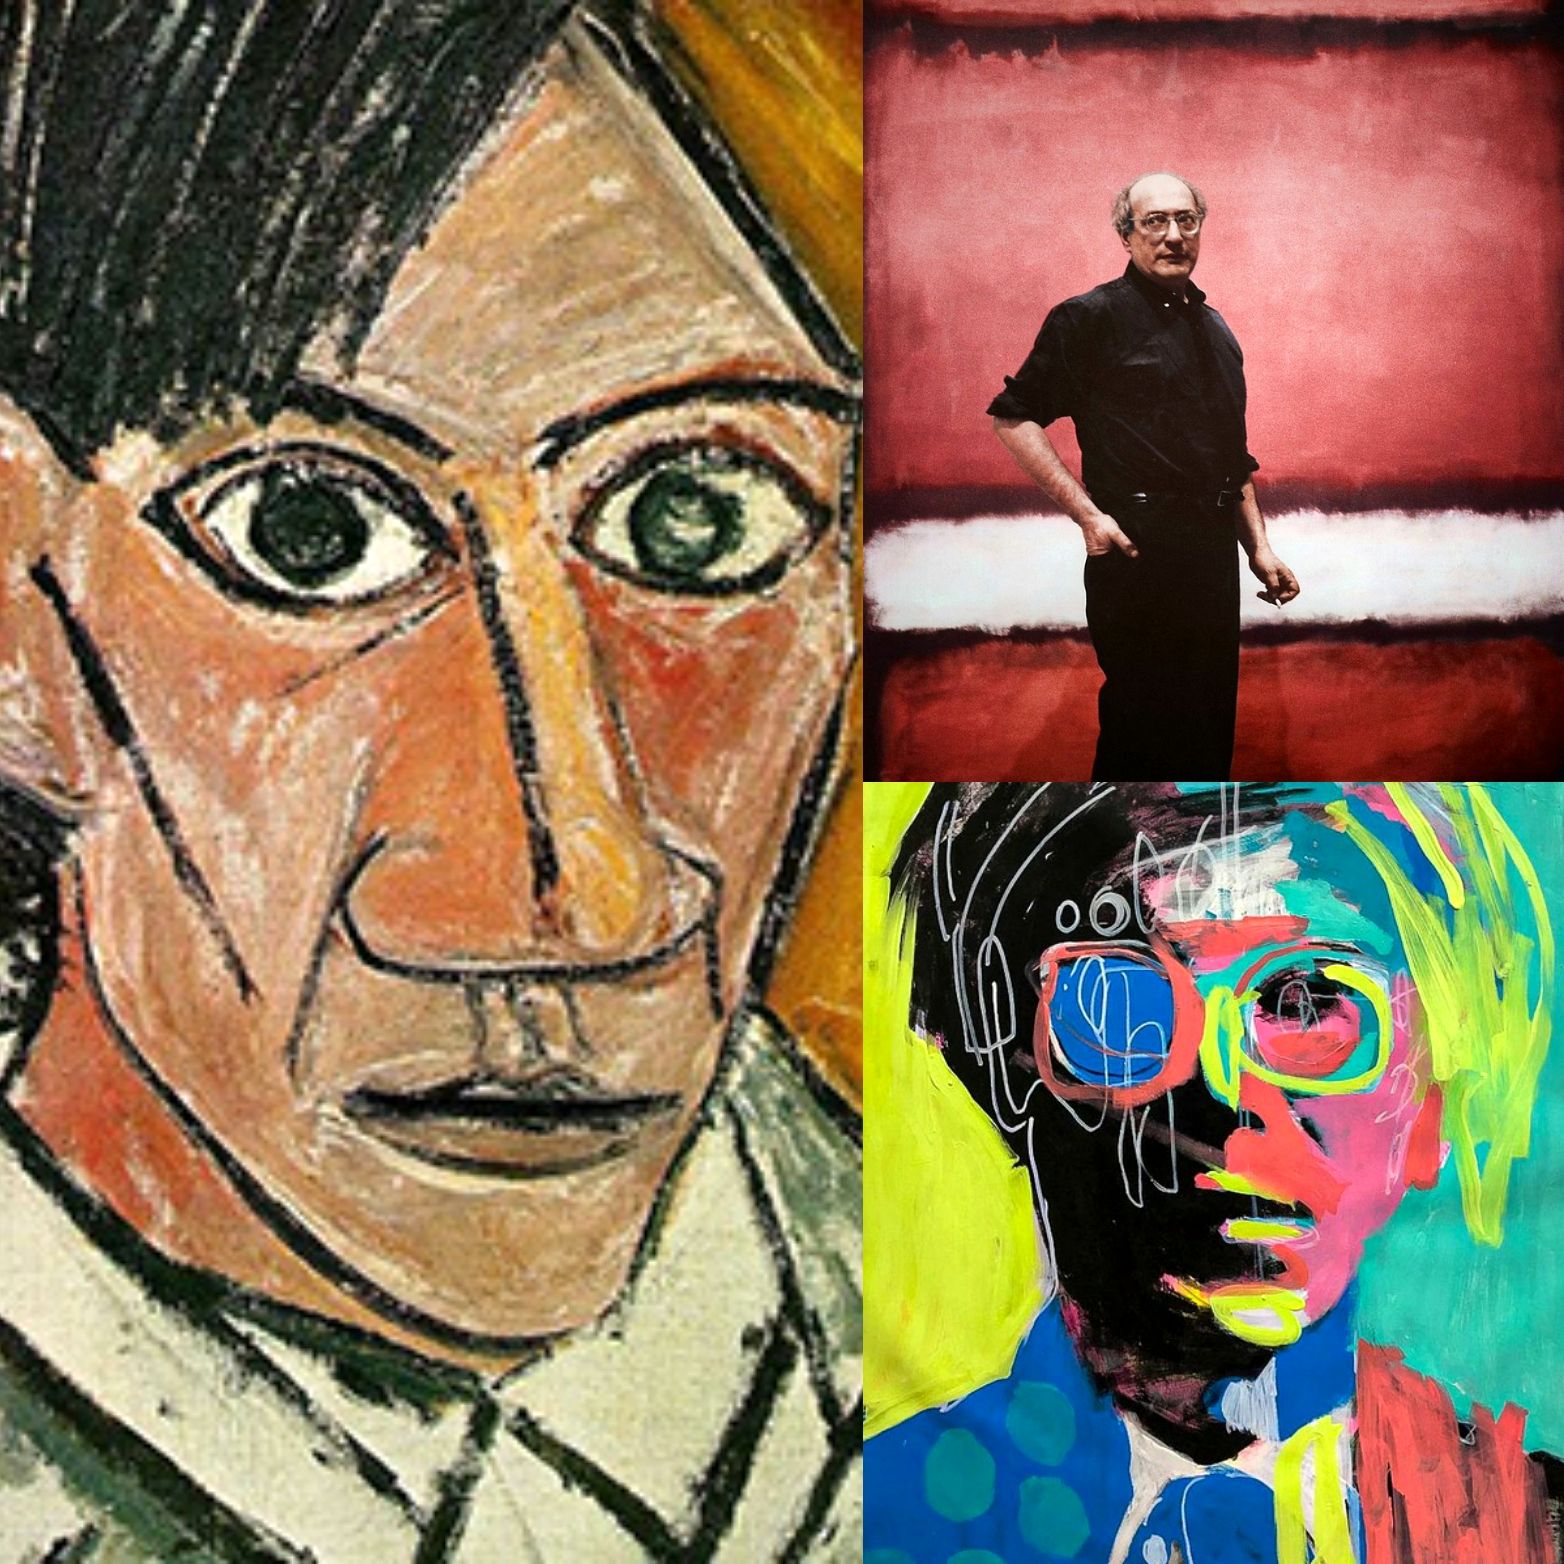 Pablo Picasso, Mark Rothko, Andy Warhol are going up for auction